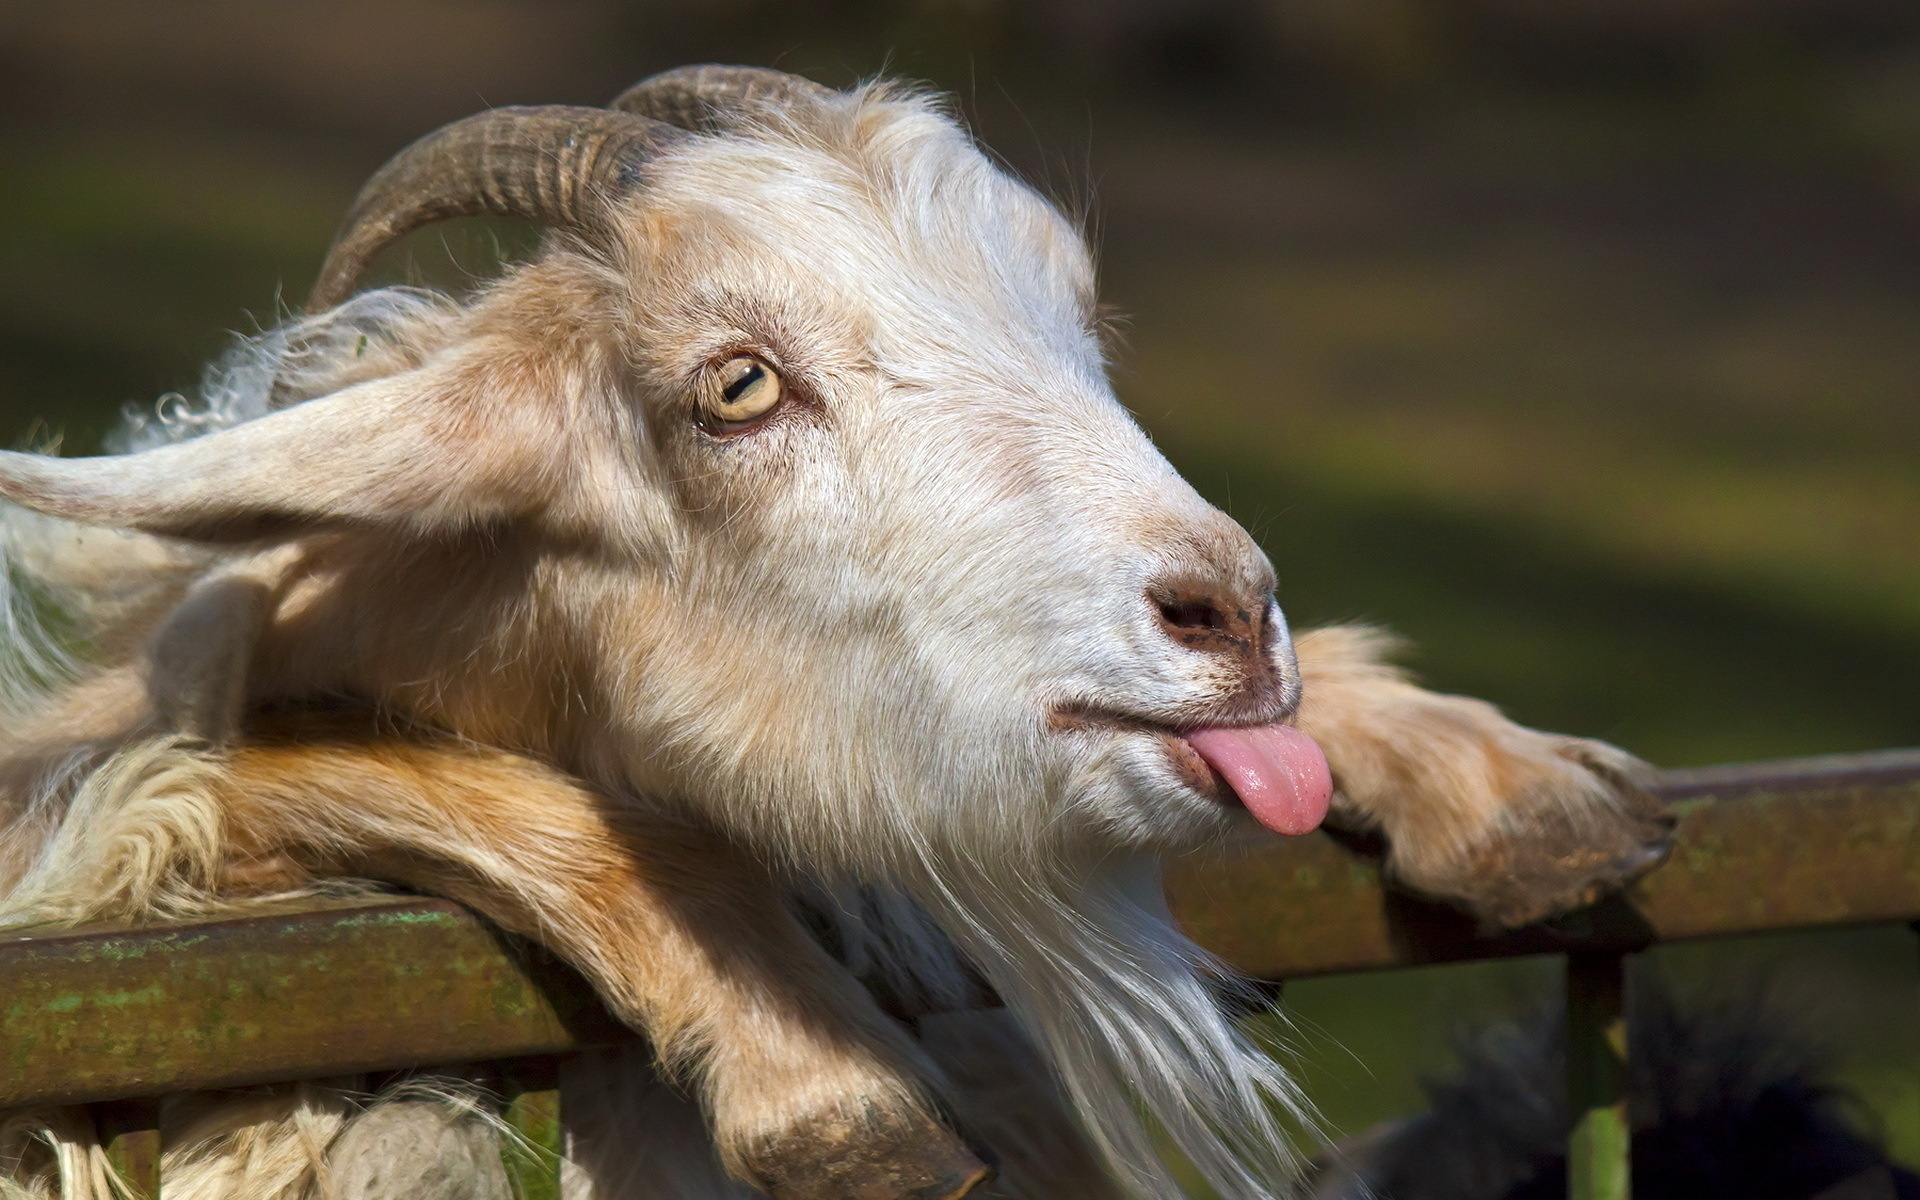 animals goat face tongue humor funny horns fence eyes nose wallpaper